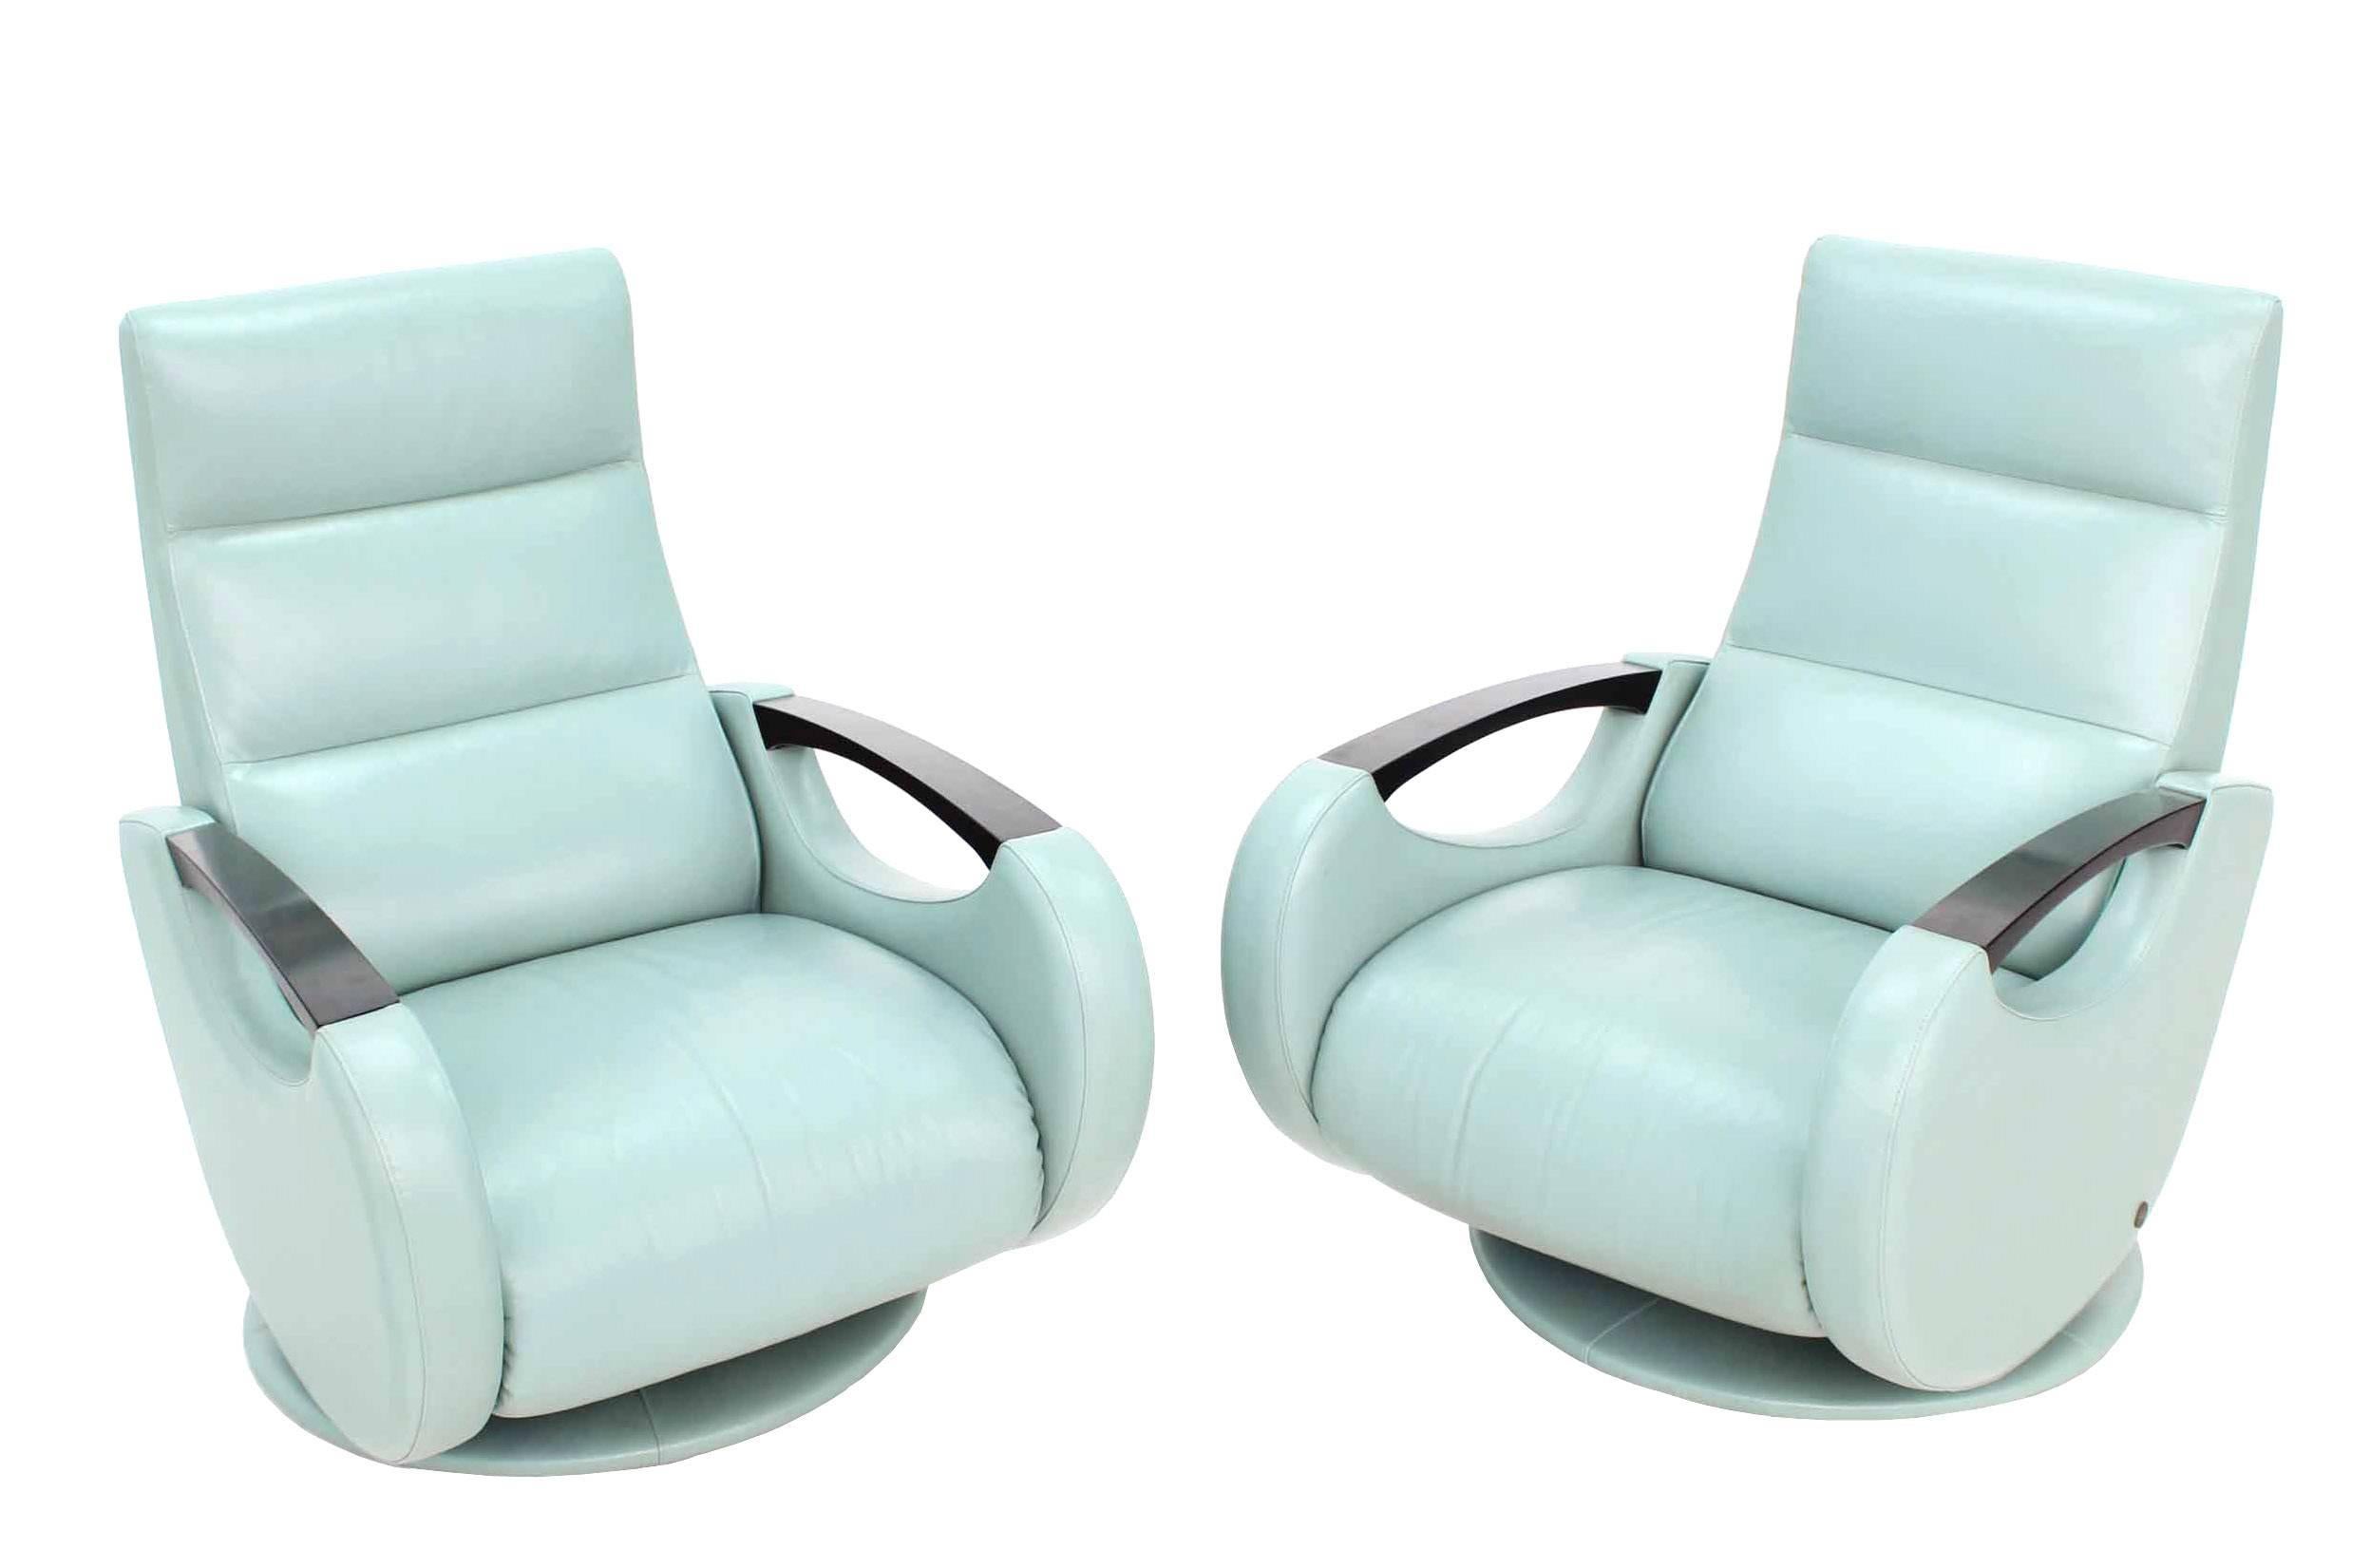 Pair of Mid Century Modern Leather Recliner Lounge Chairs Space Age Design  1